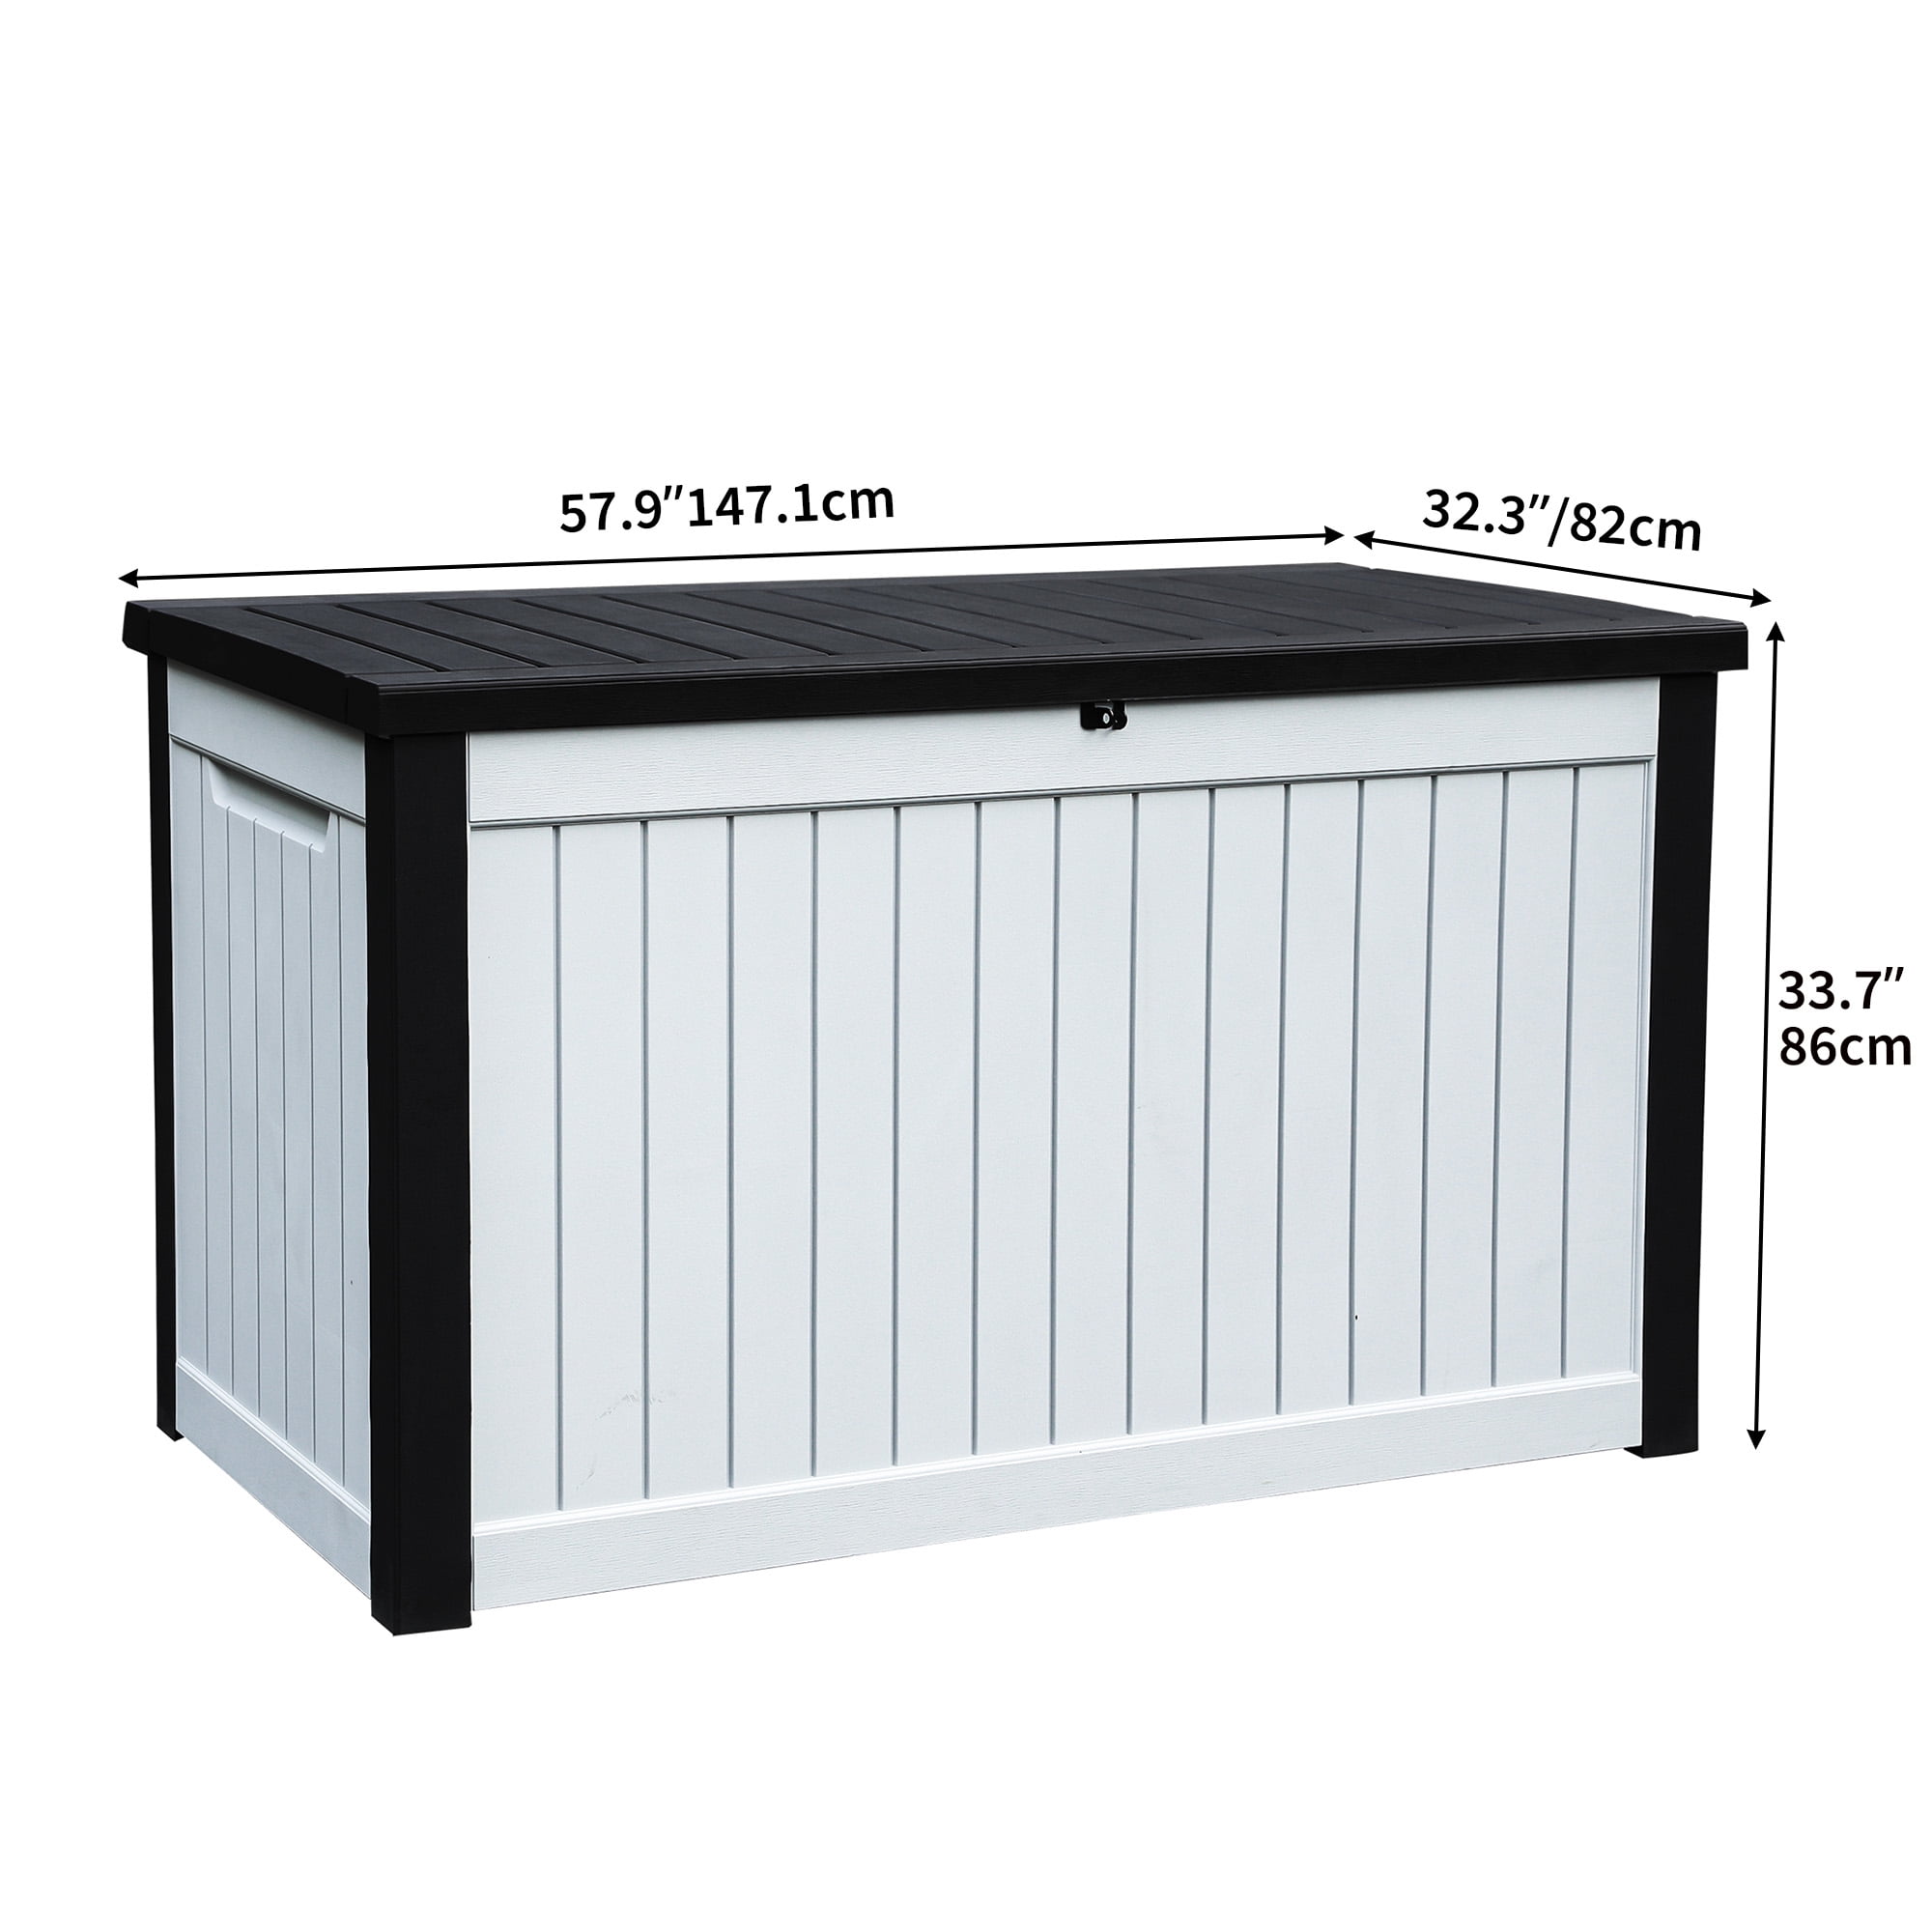 Dextrus Extra Large Outdoor Deck Box - 230 Gallon Capacity for Outdoor  Furniture, Gardening Tools, and Sporting/Pools Gear - Durable Weather  Resistant Resin, Secure Locking System (Black&White1) 